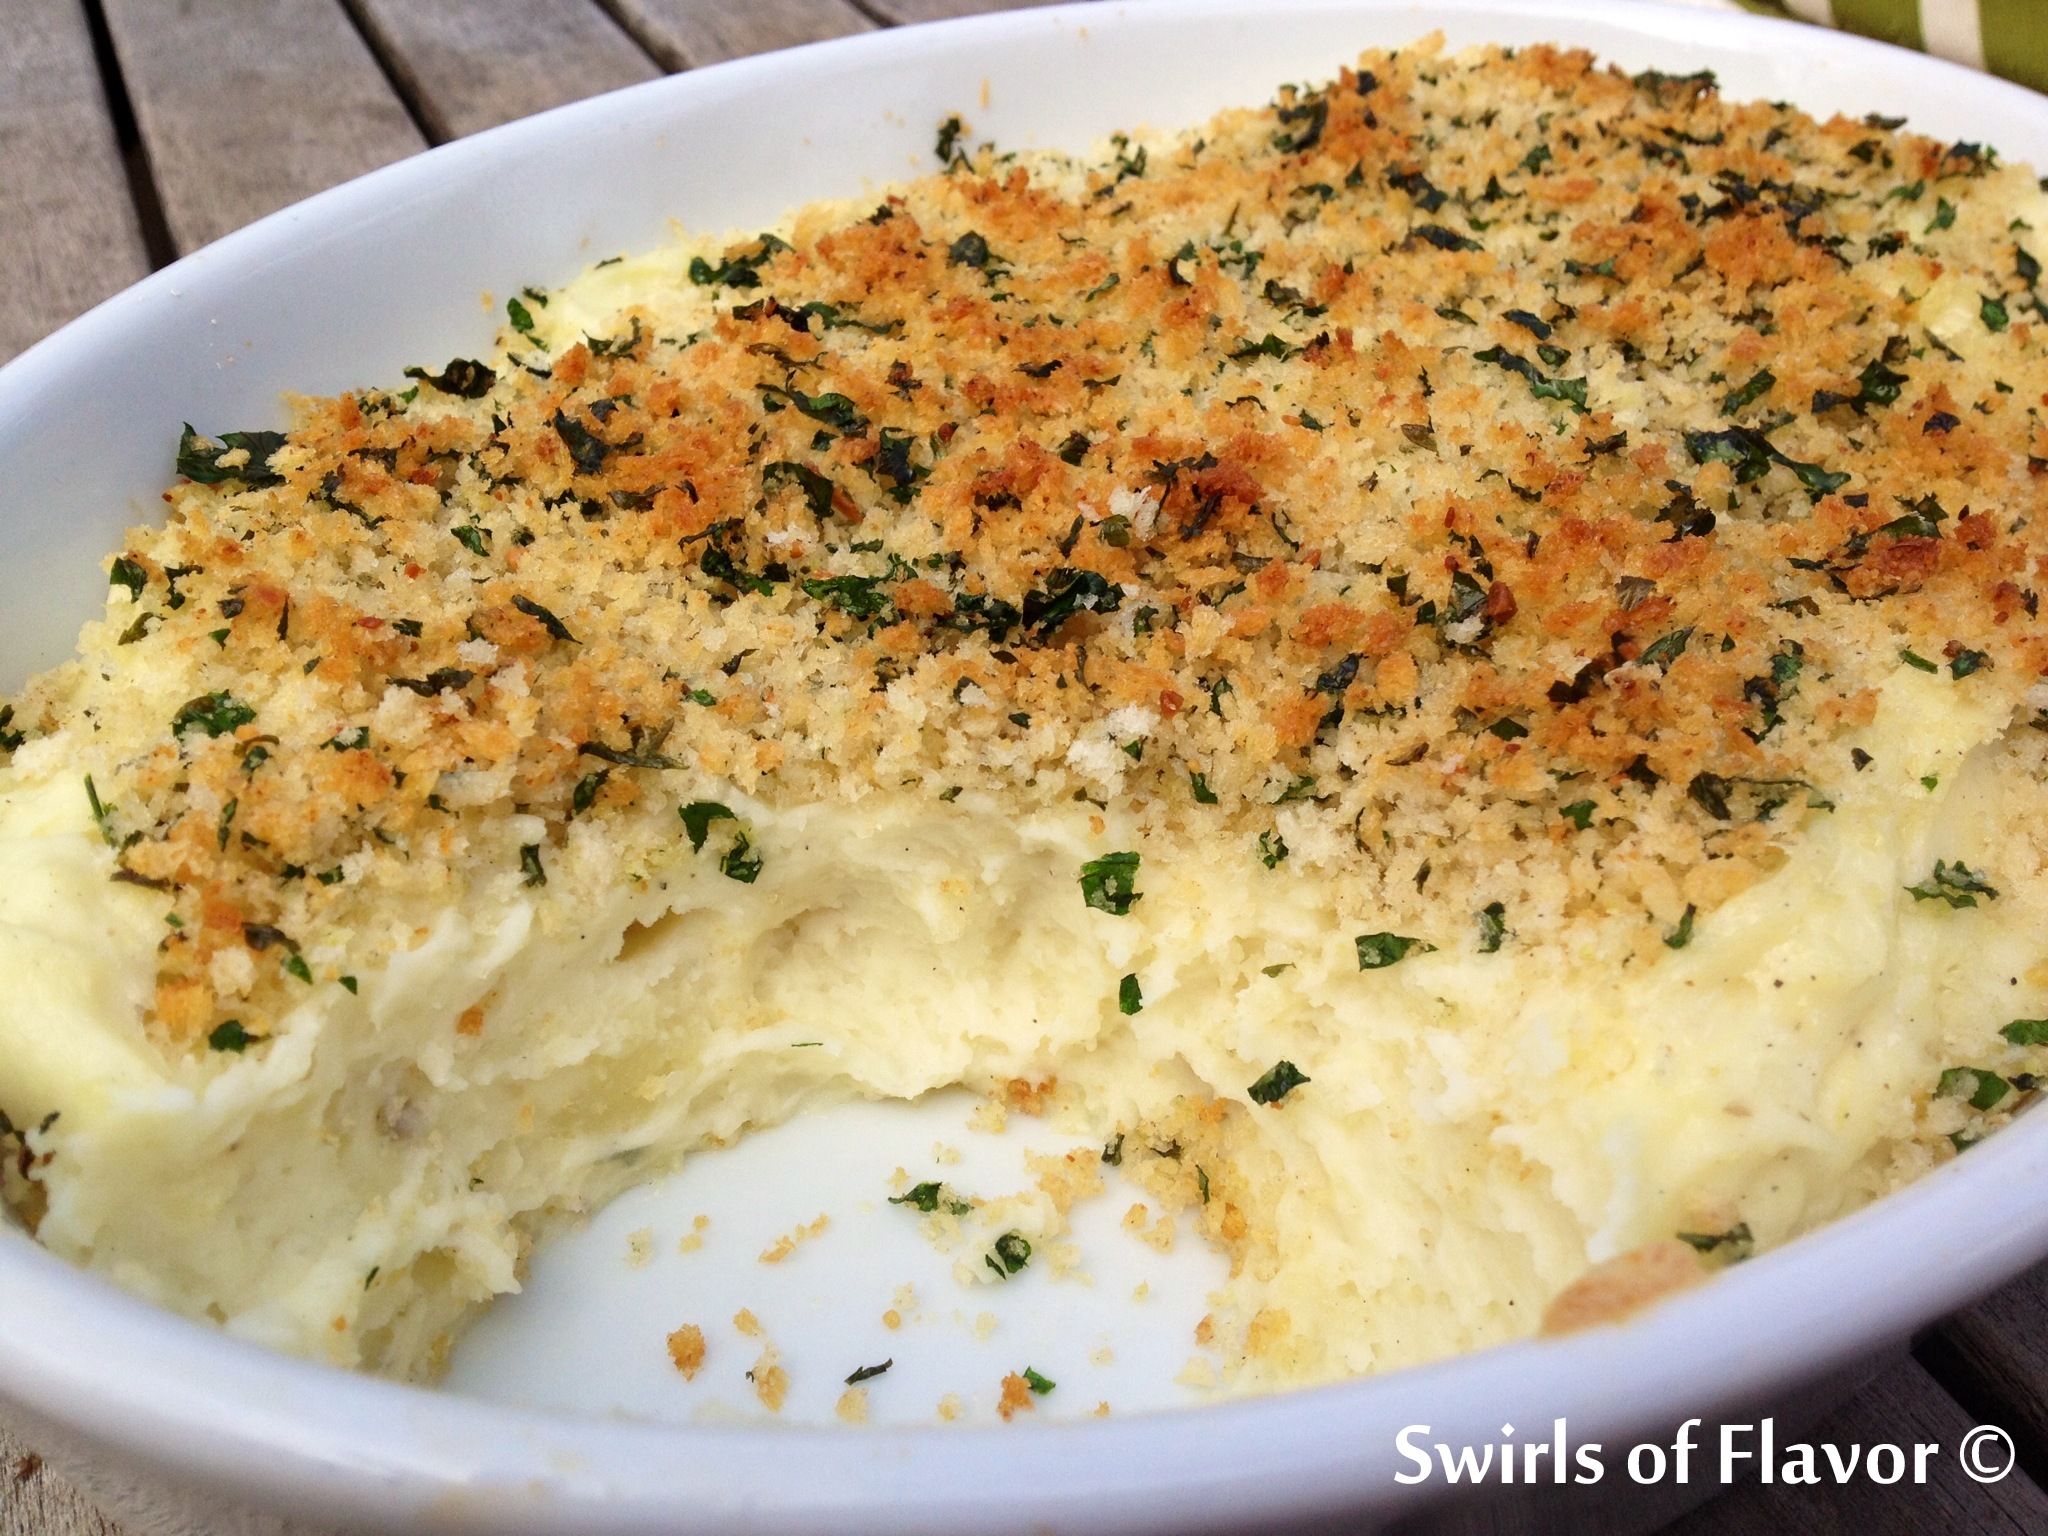 Creamy Garlic Mashed Potatoes with Panko Topping by Swirls of Flavor - WEEKEND POTLUCK 456